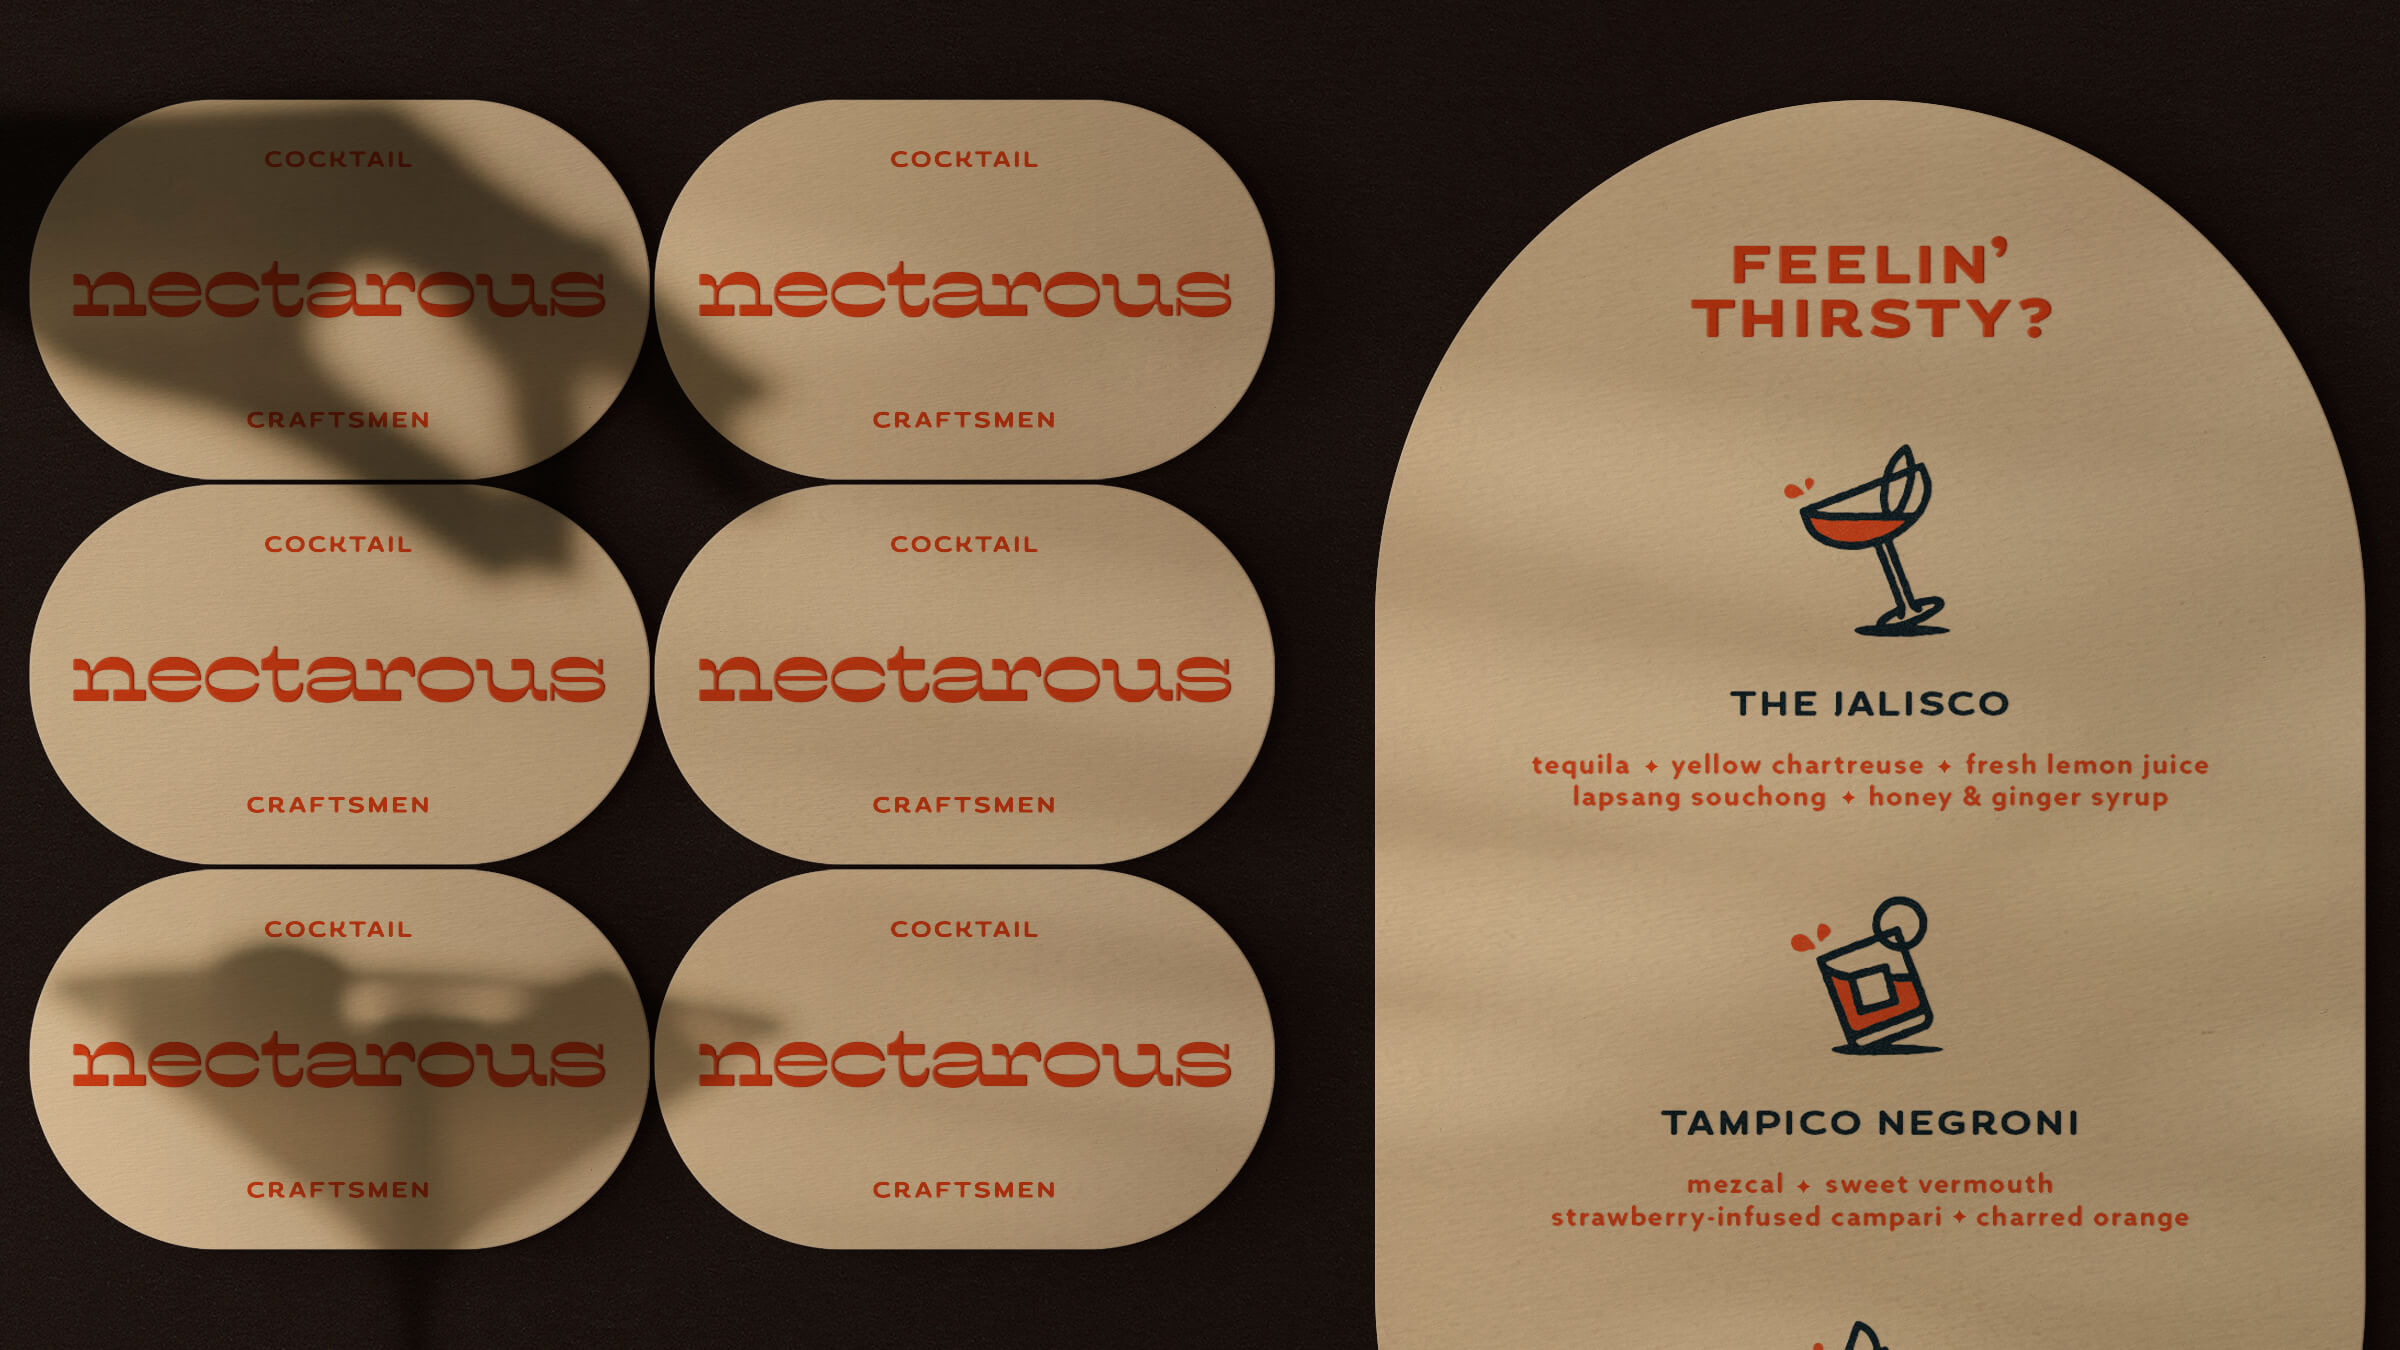 Nectarous business card designs and menu designs, featuring vibrant wordmark logo and illustrated cocktail icons.